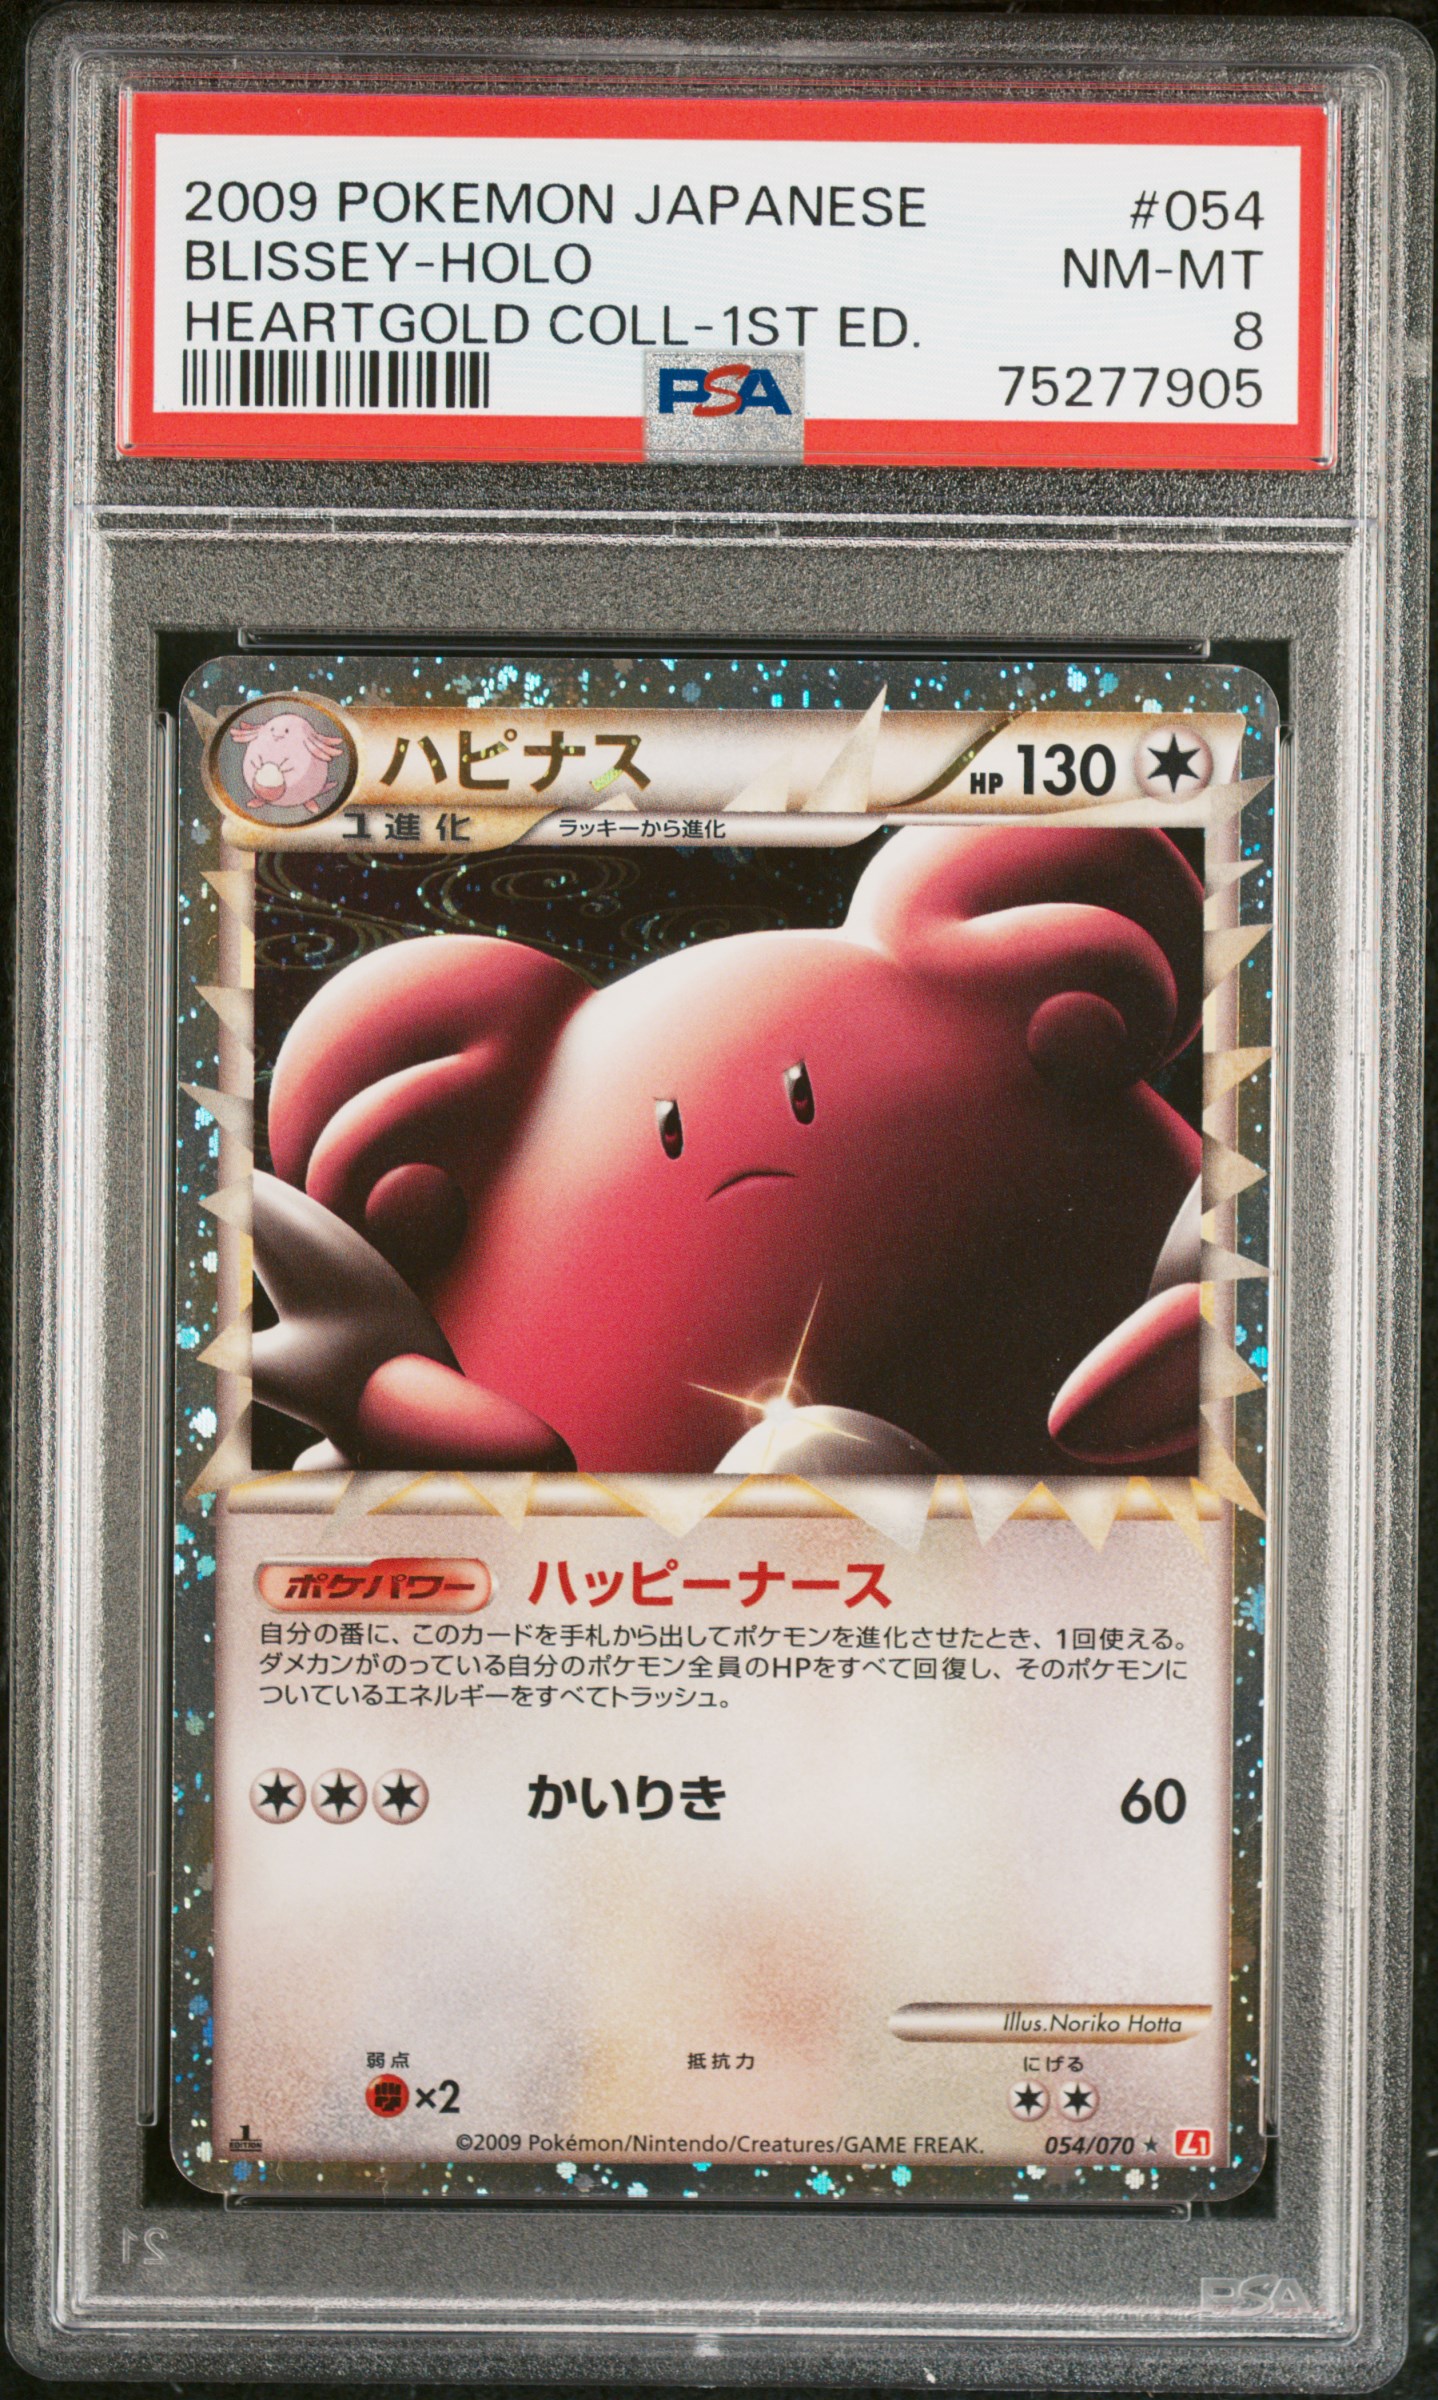 2009 Pokemon Japanese Heartgold Collection 1st Edition Holofoil #054 Blissey - PSA NM-MT 8